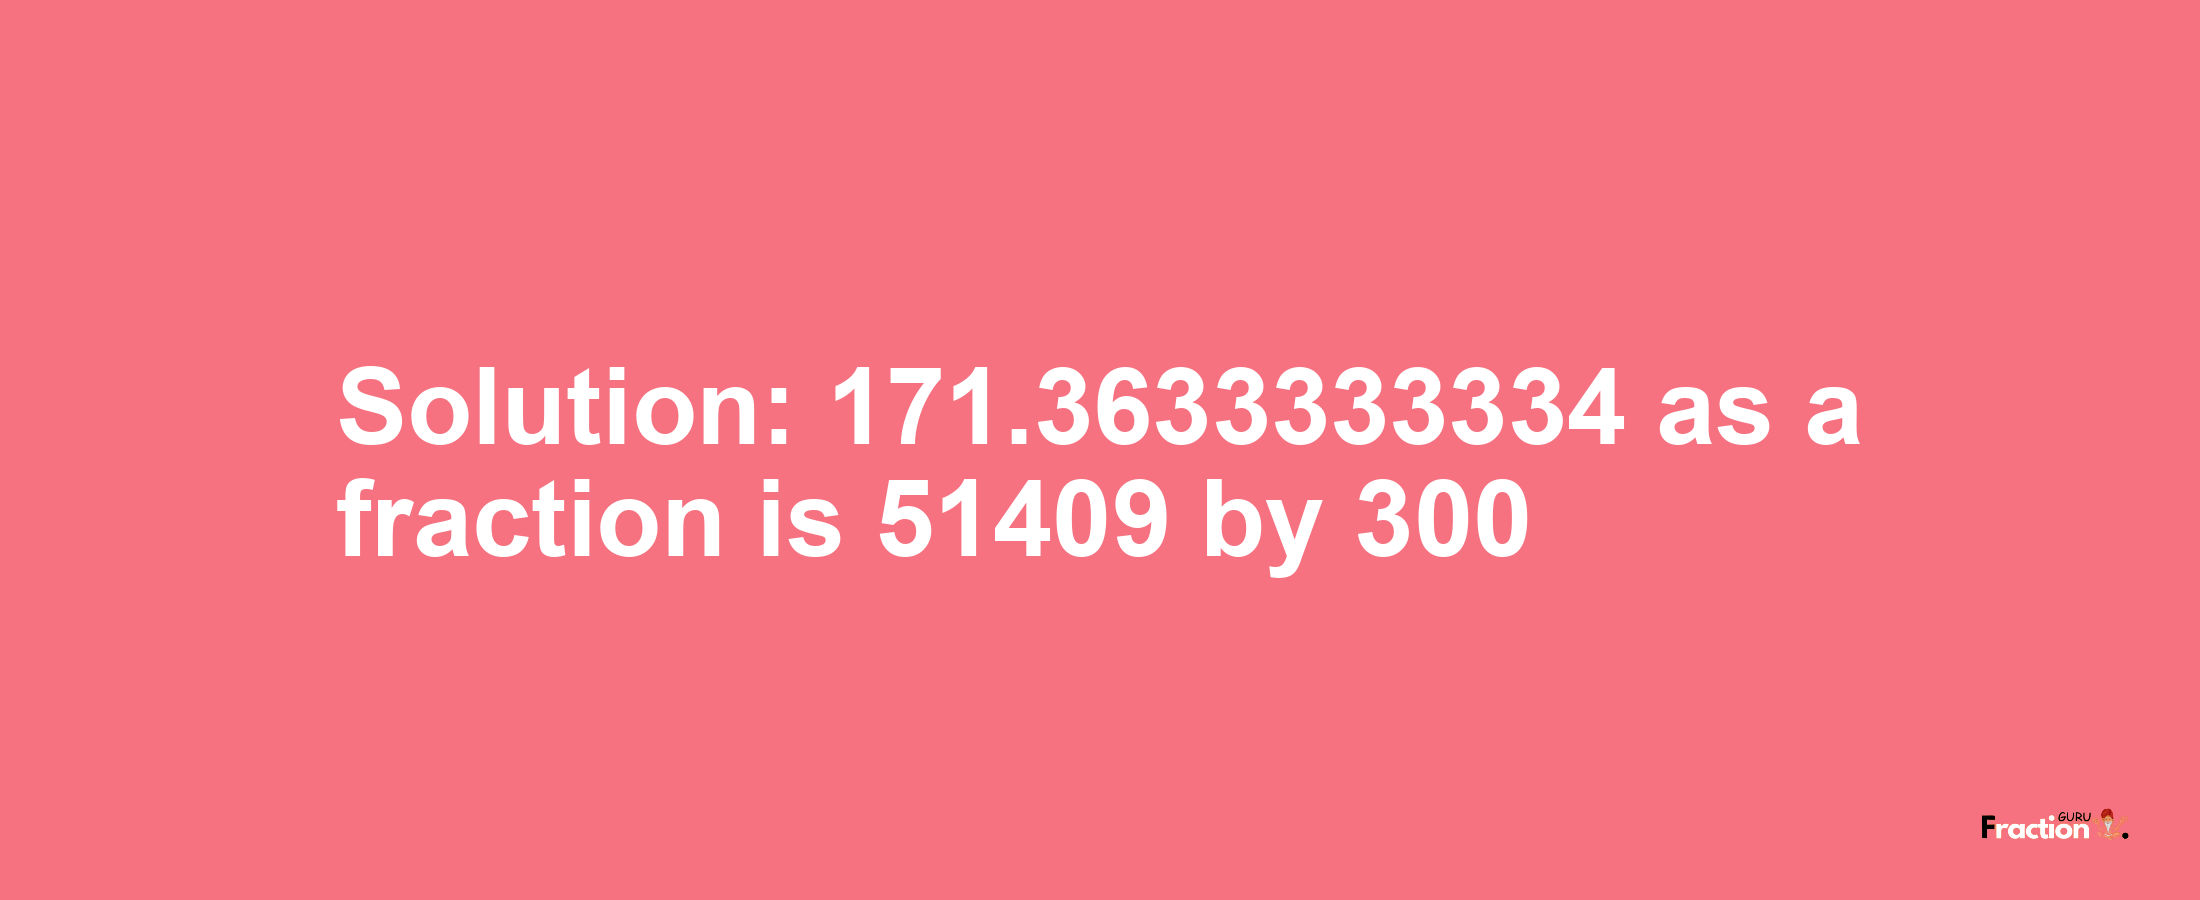 Solution:171.3633333334 as a fraction is 51409/300